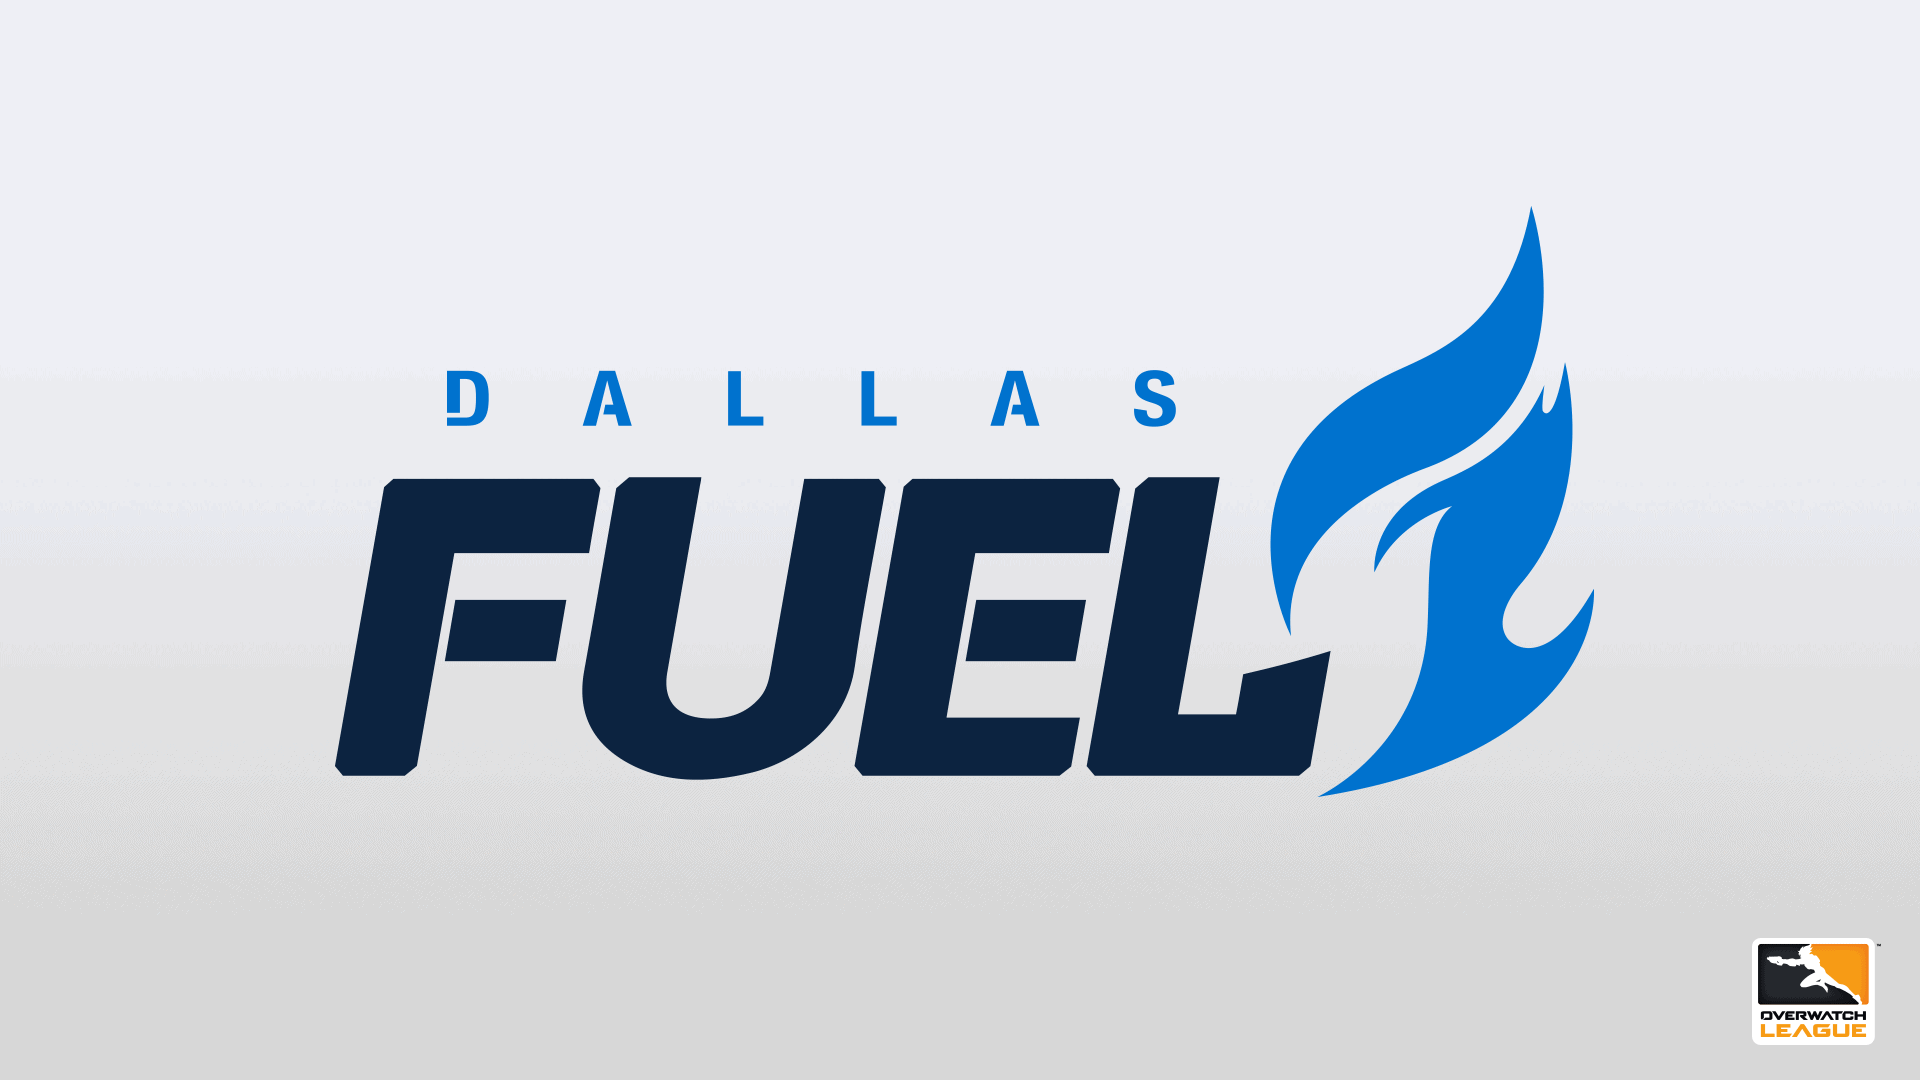 The Overwatch League team Dallas Fuel's logo with a blue flame